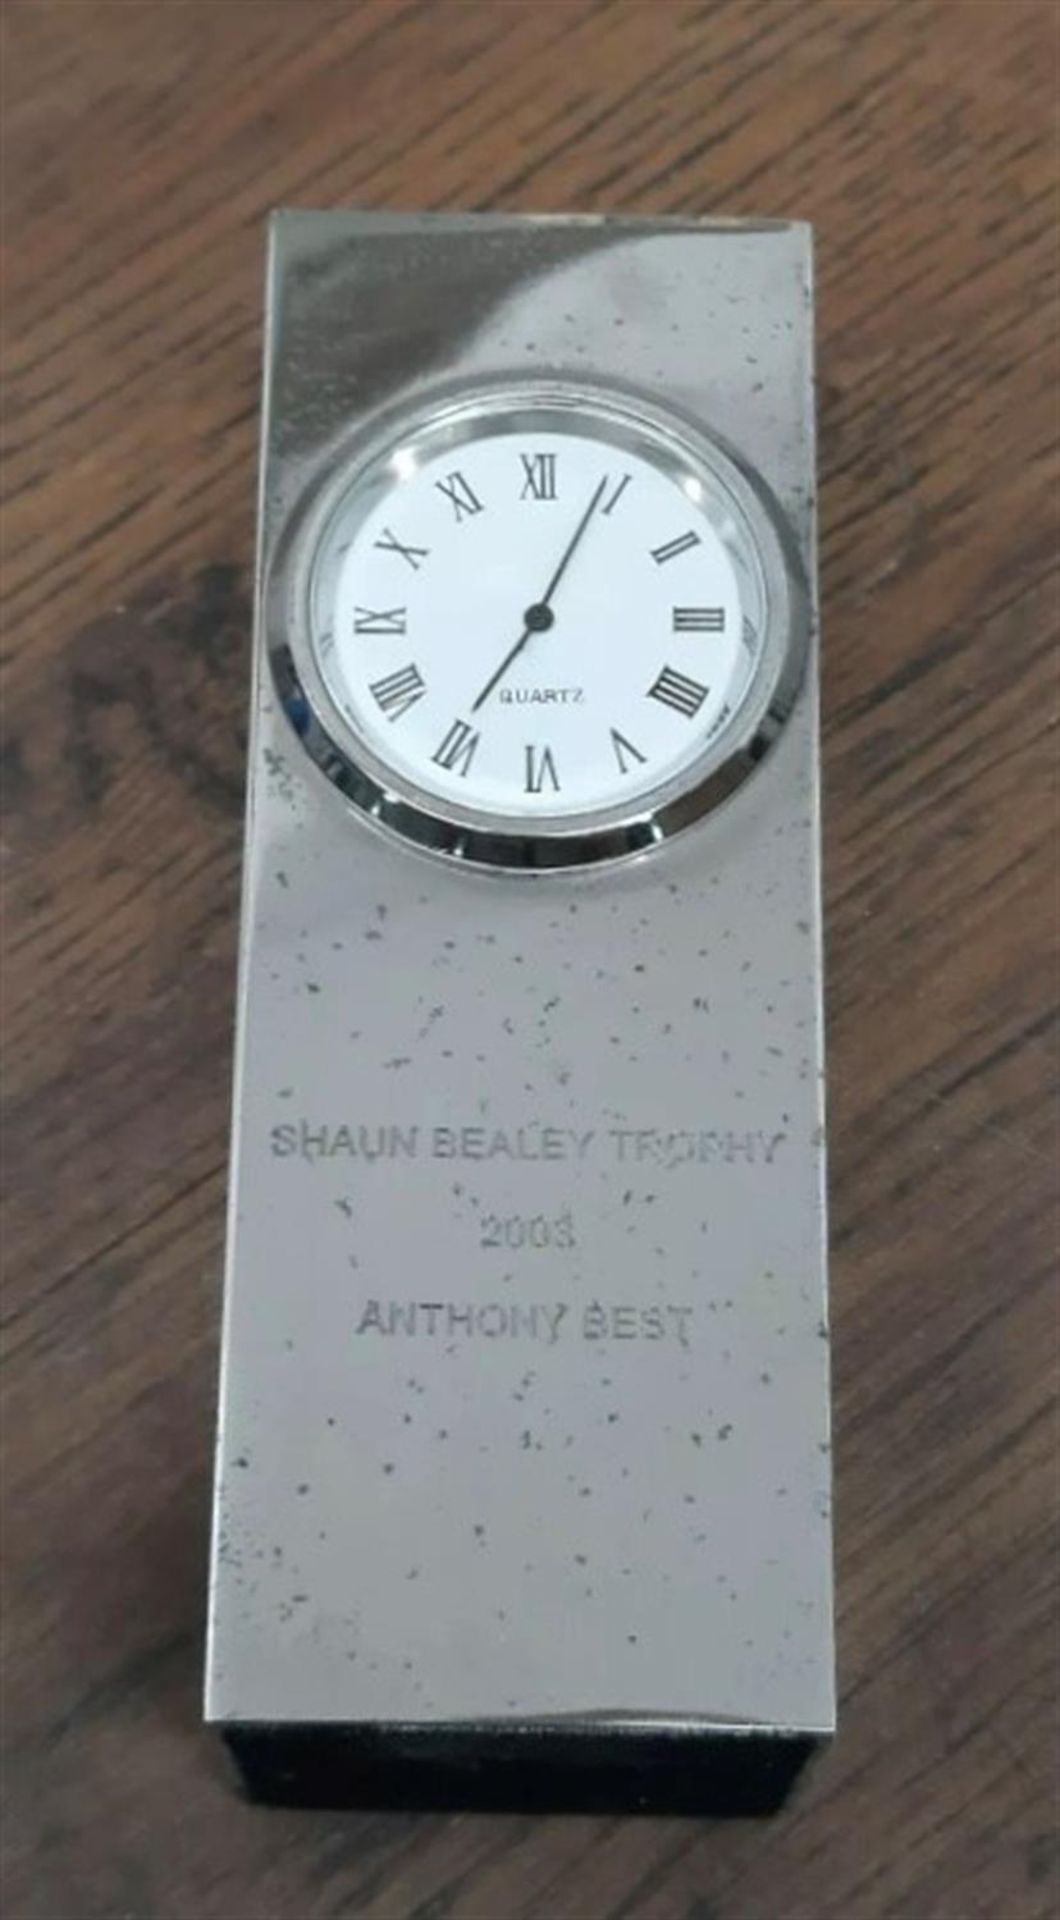 A rare, silver-plated Ferrari Owners' Club 'Shaun Bealey Trophy' clock - Image 3 of 4